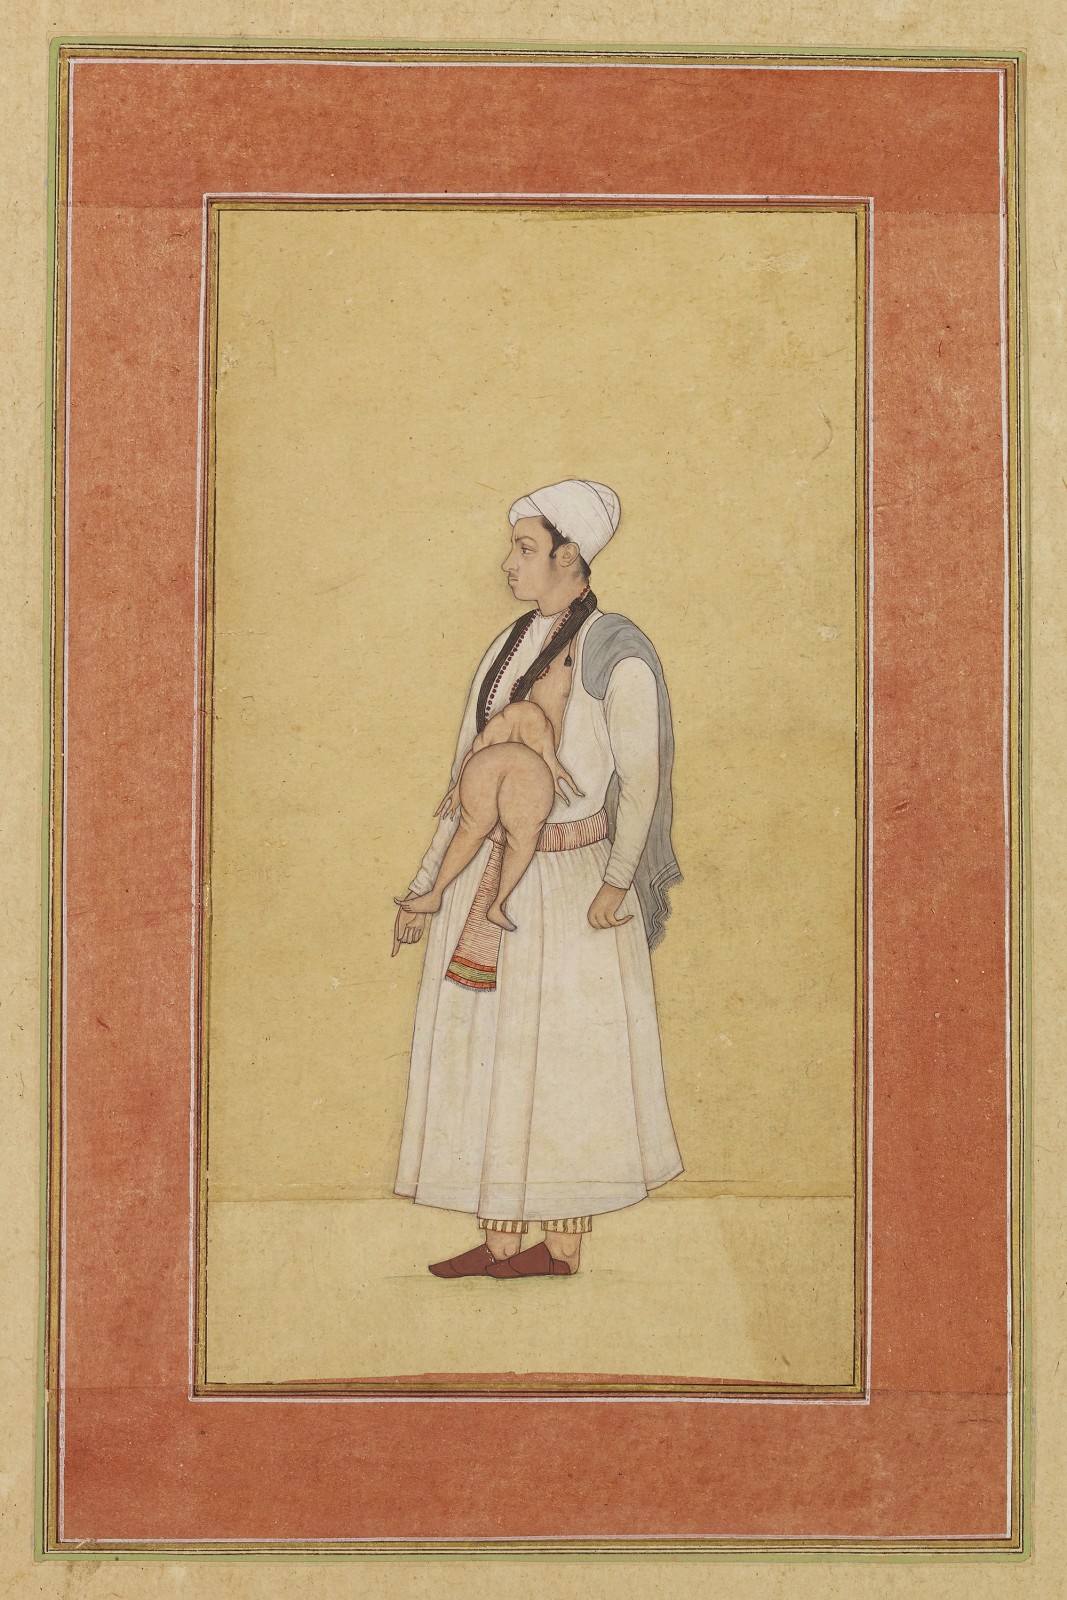 A man with an extraordinary growth from his abdomen – a painting forming the recto of a late 17th century Royal Album page, Mughal, late 17th century